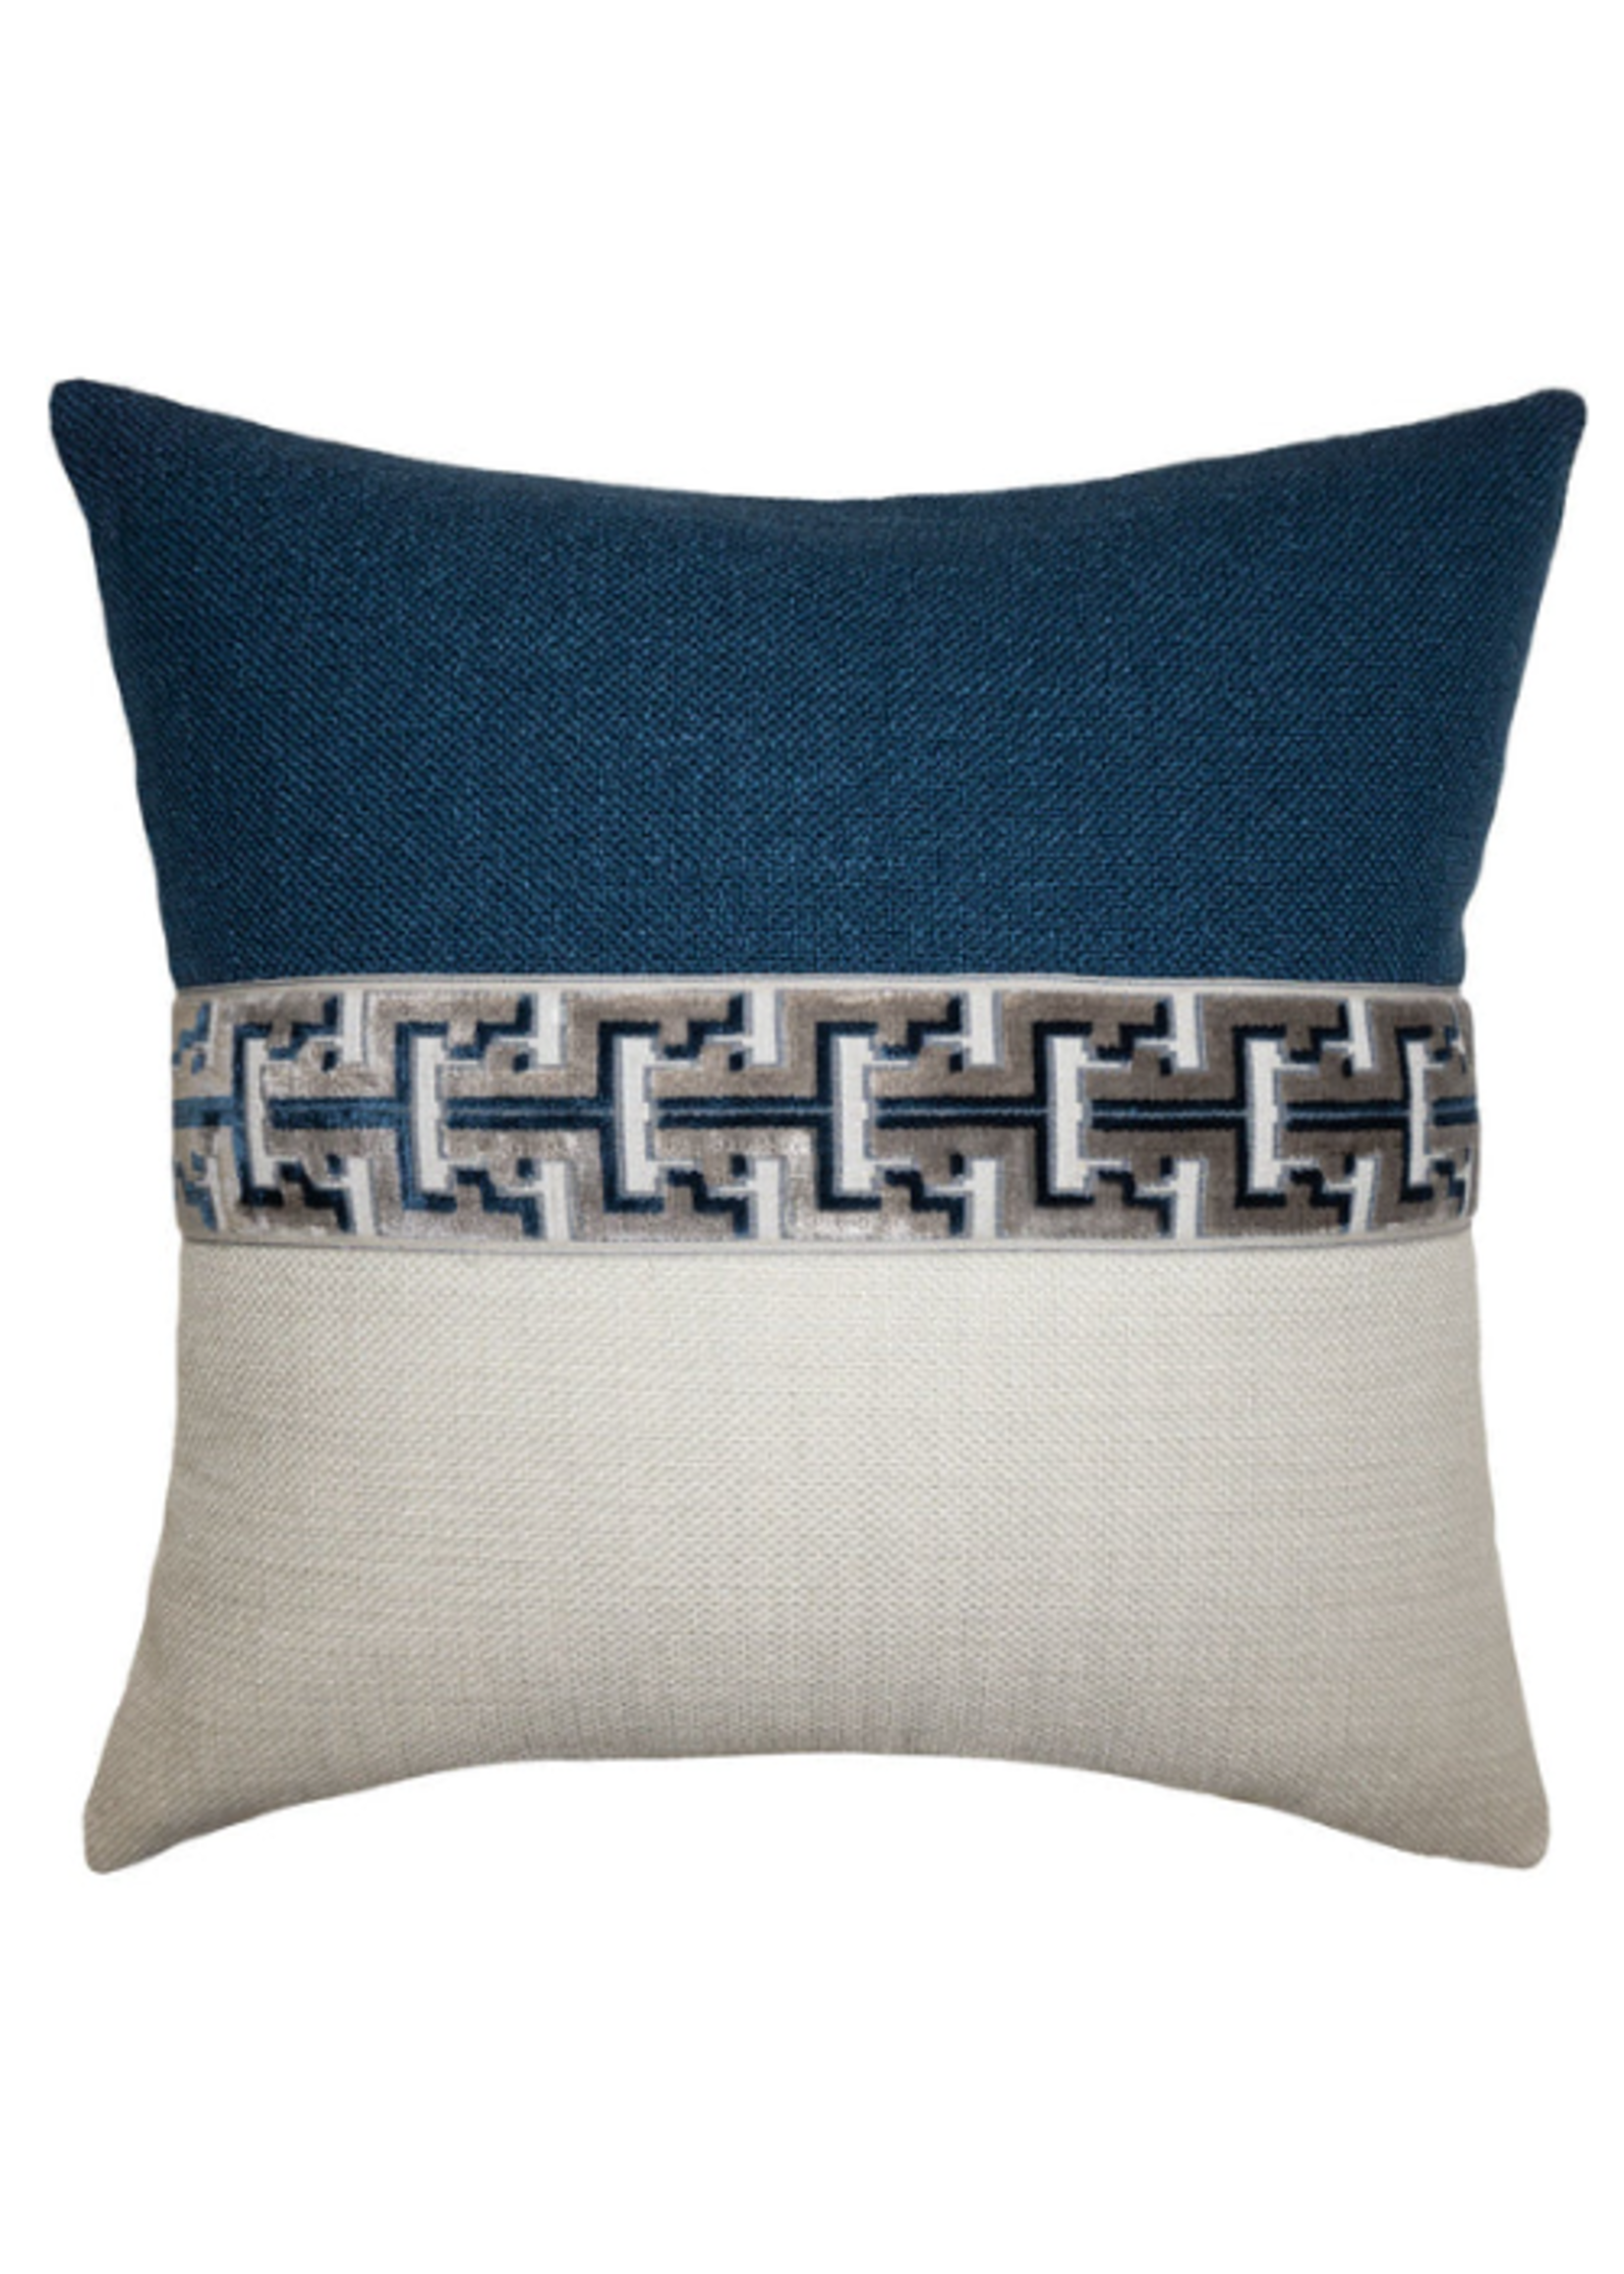 Square Feathers Square Feathers Jager Battleship 20x20 Pillow